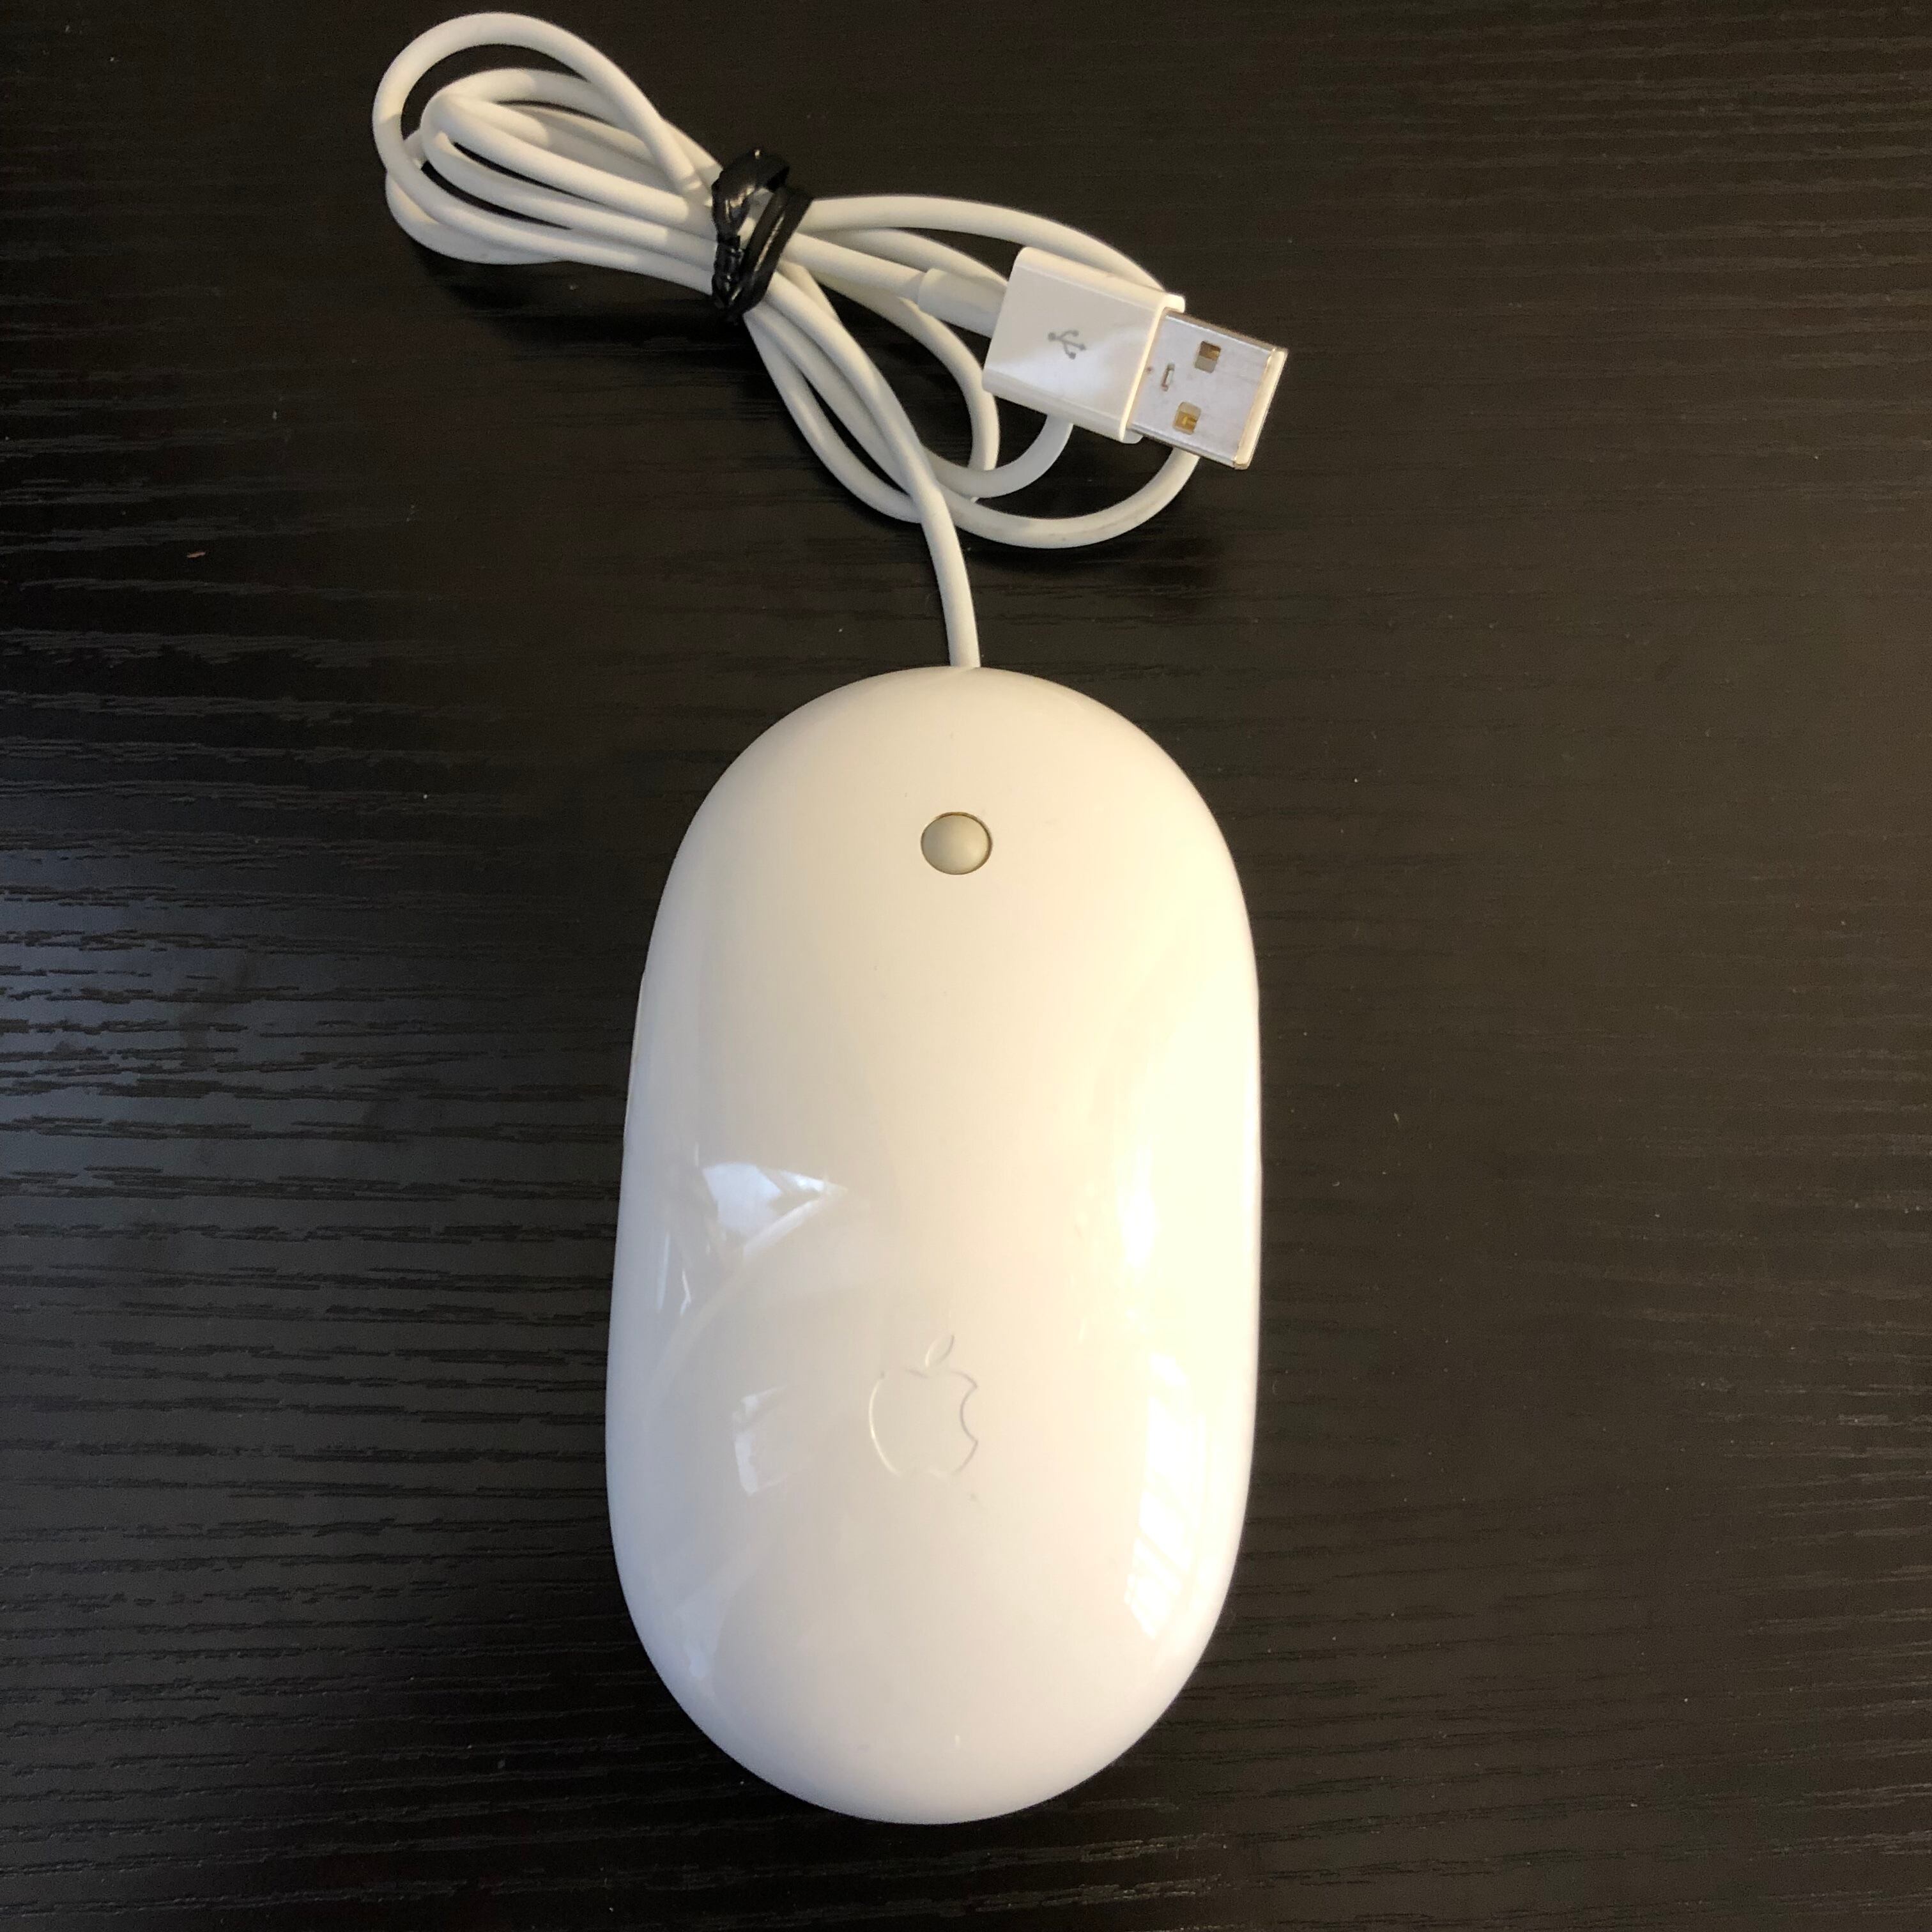 Apple純正Mighty Mouse USBマウス A1152